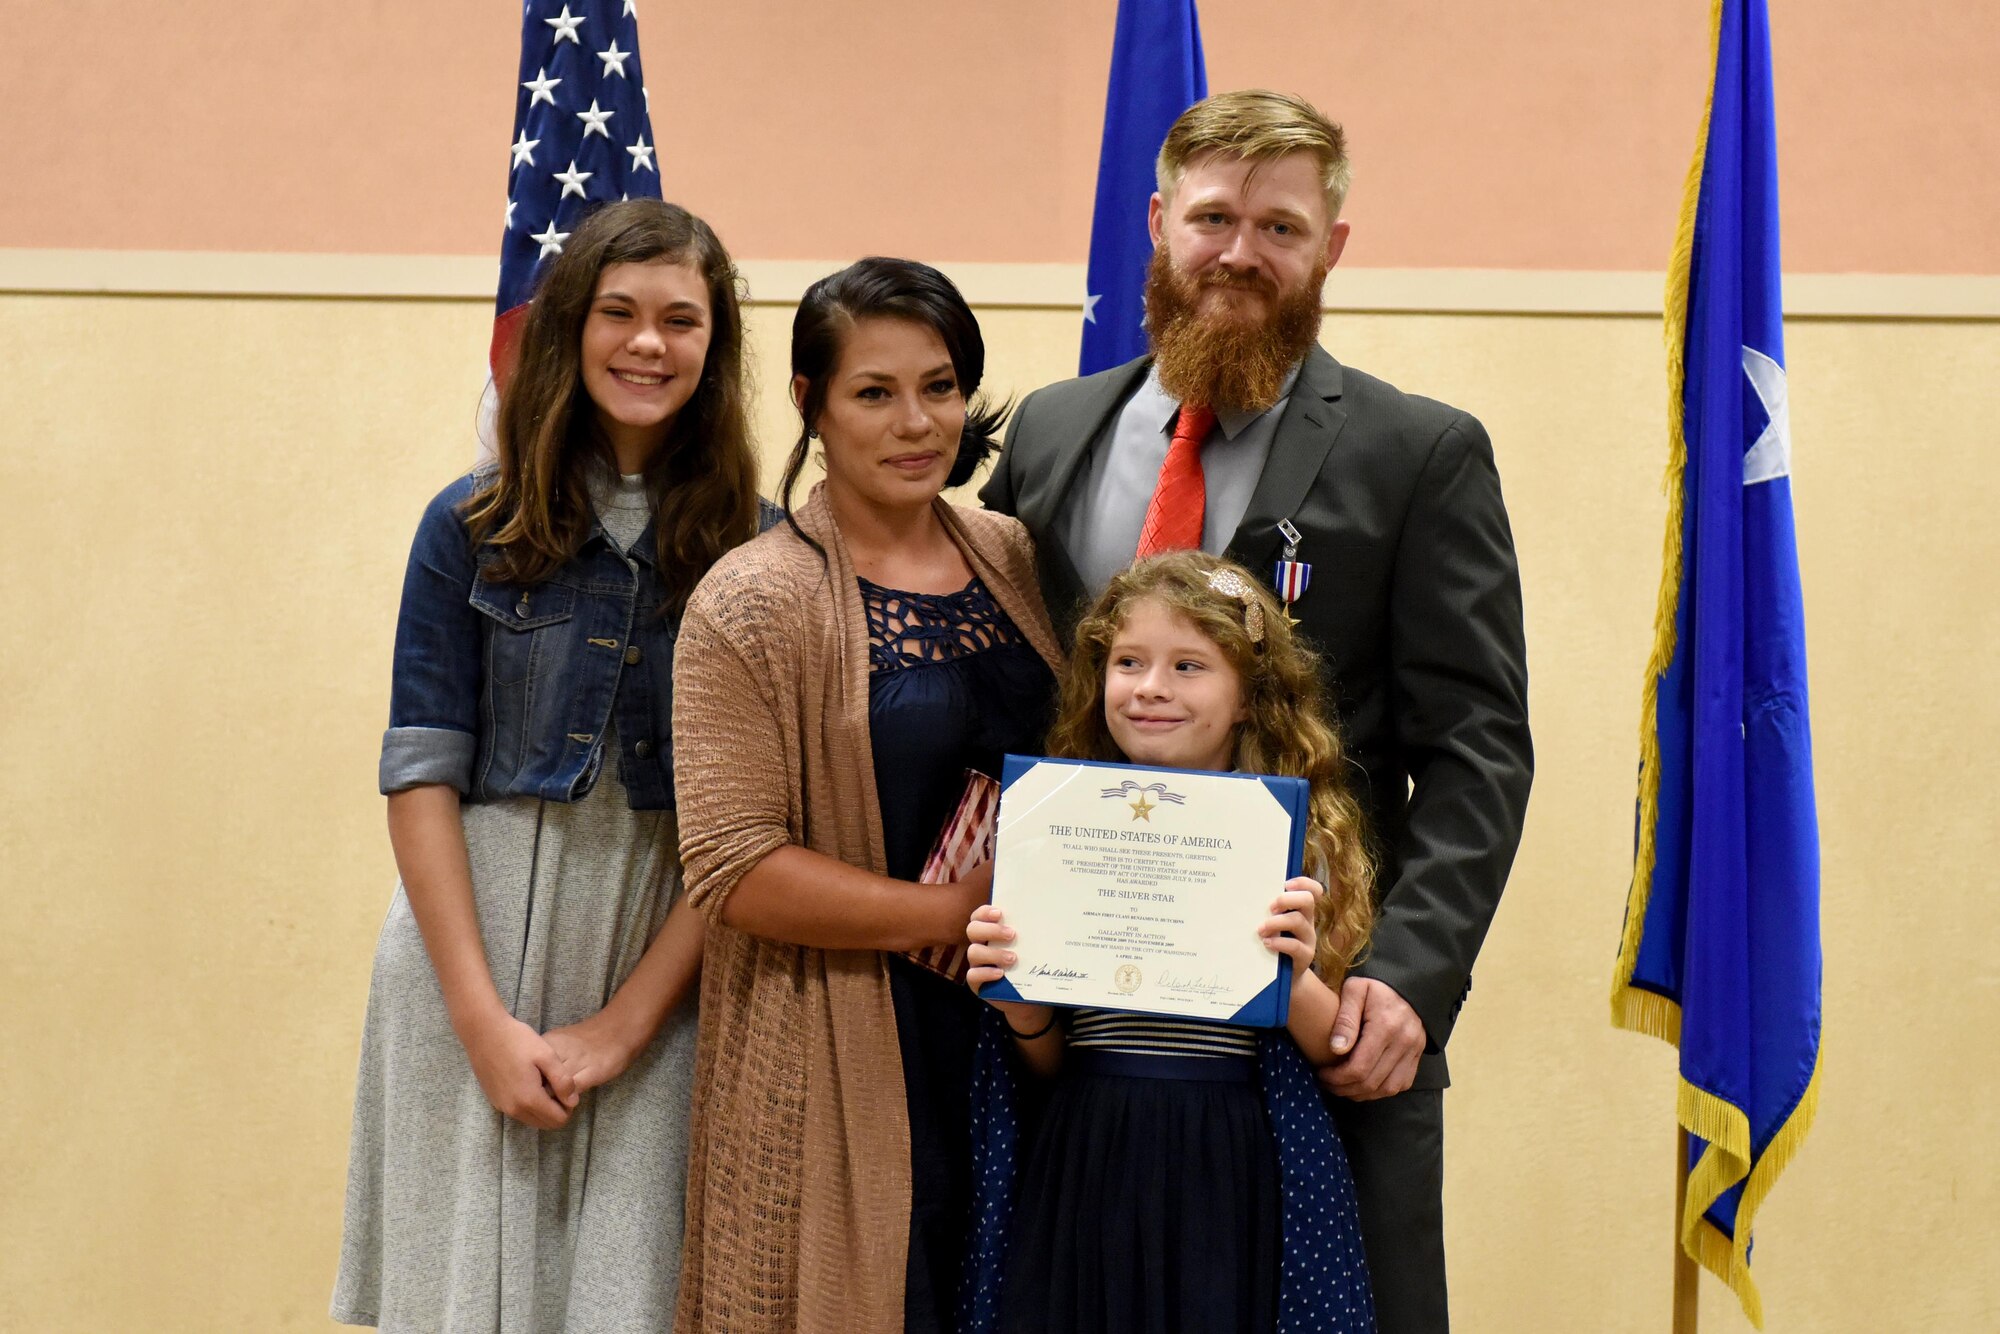 Retired Staff Sgt. Benjamin Hutchins, 18th Air Support Operations Group joint terminal attack controller, and his family pose for a photo during a ceremony where he received the Silver Star Medal, Nov. 4, 2016, at Pope Army Airfield, North Carolina. Hutchins received the Silver Star for attempting to save drowning soldiers in the face of imminent danger during a deployment in 2009 in Bala Murghab, Afghanistan. (U.S. Air Force photo by Airman Miranda A. Loera)